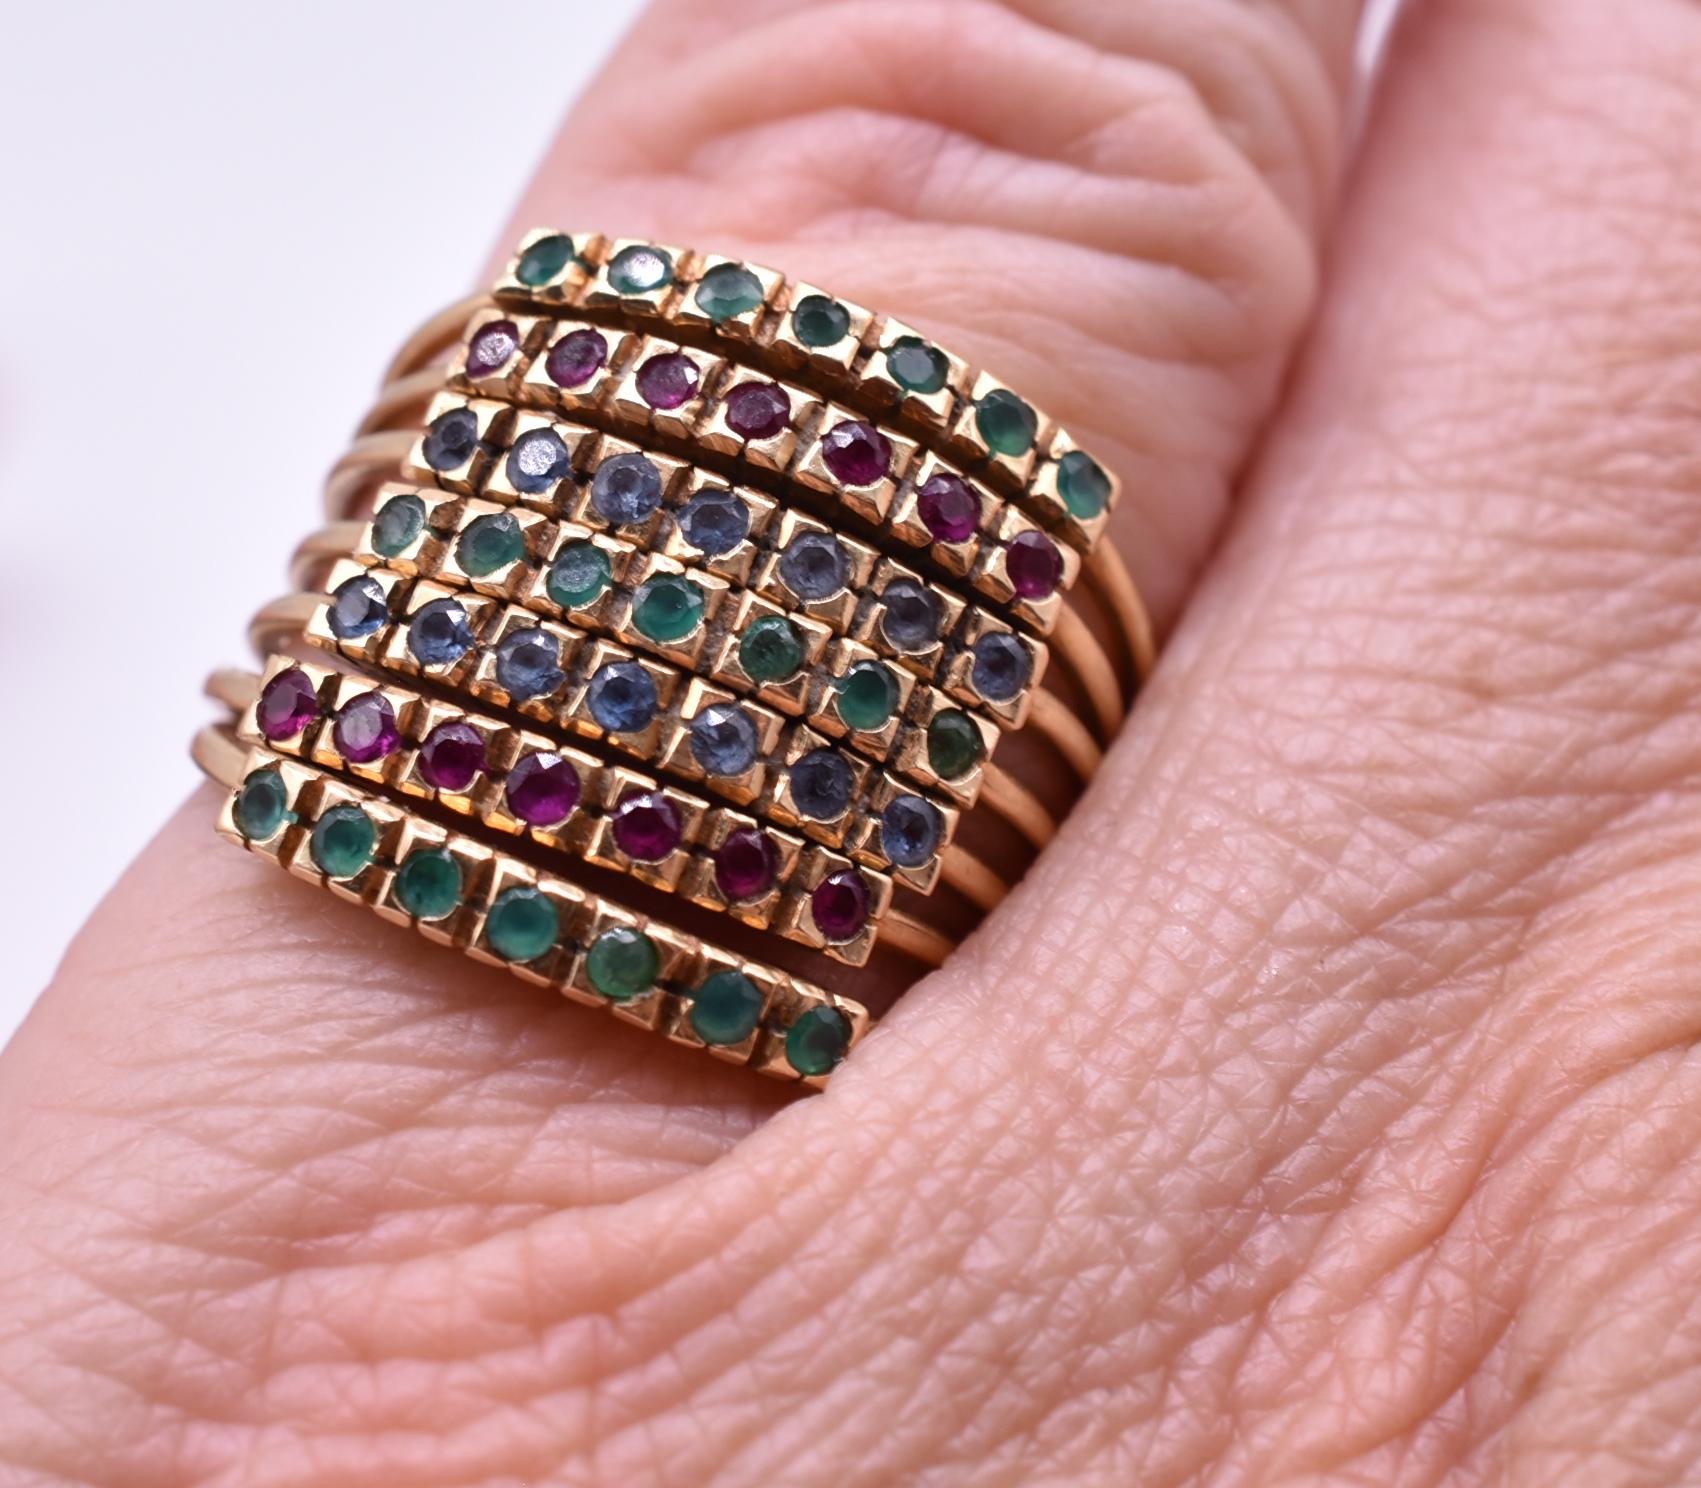 15K lucky seven harem ring, with seven bands of emeralds, rubies, and sapphires, and 7 gems on each band. Tradition has it that harem rings originated in Turkey, the rings  to be given to brides. The greater the number of bands, the more important